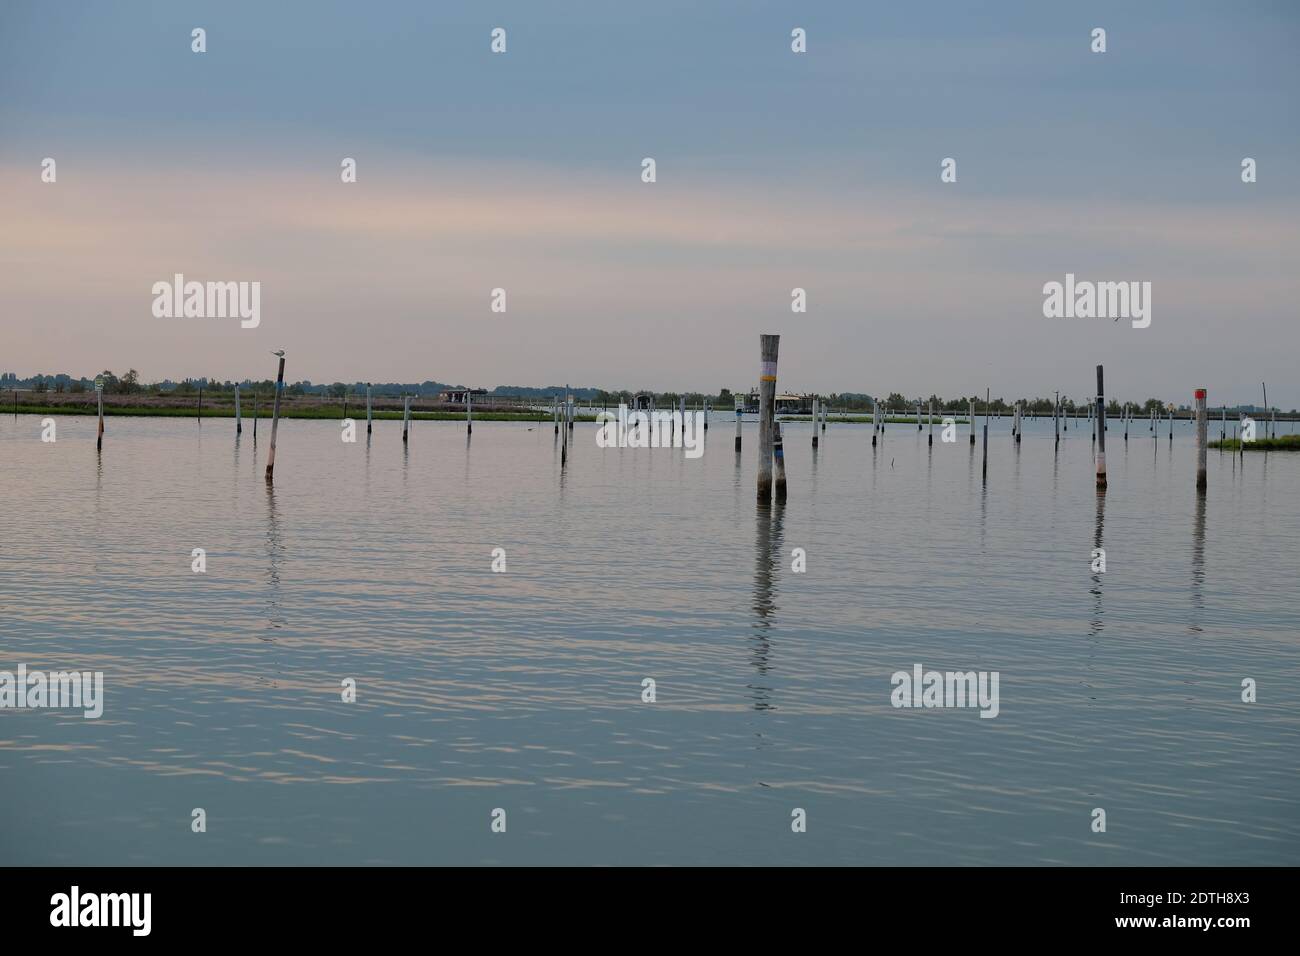 Wooden Posts In Lake Against Sky Stock Photo